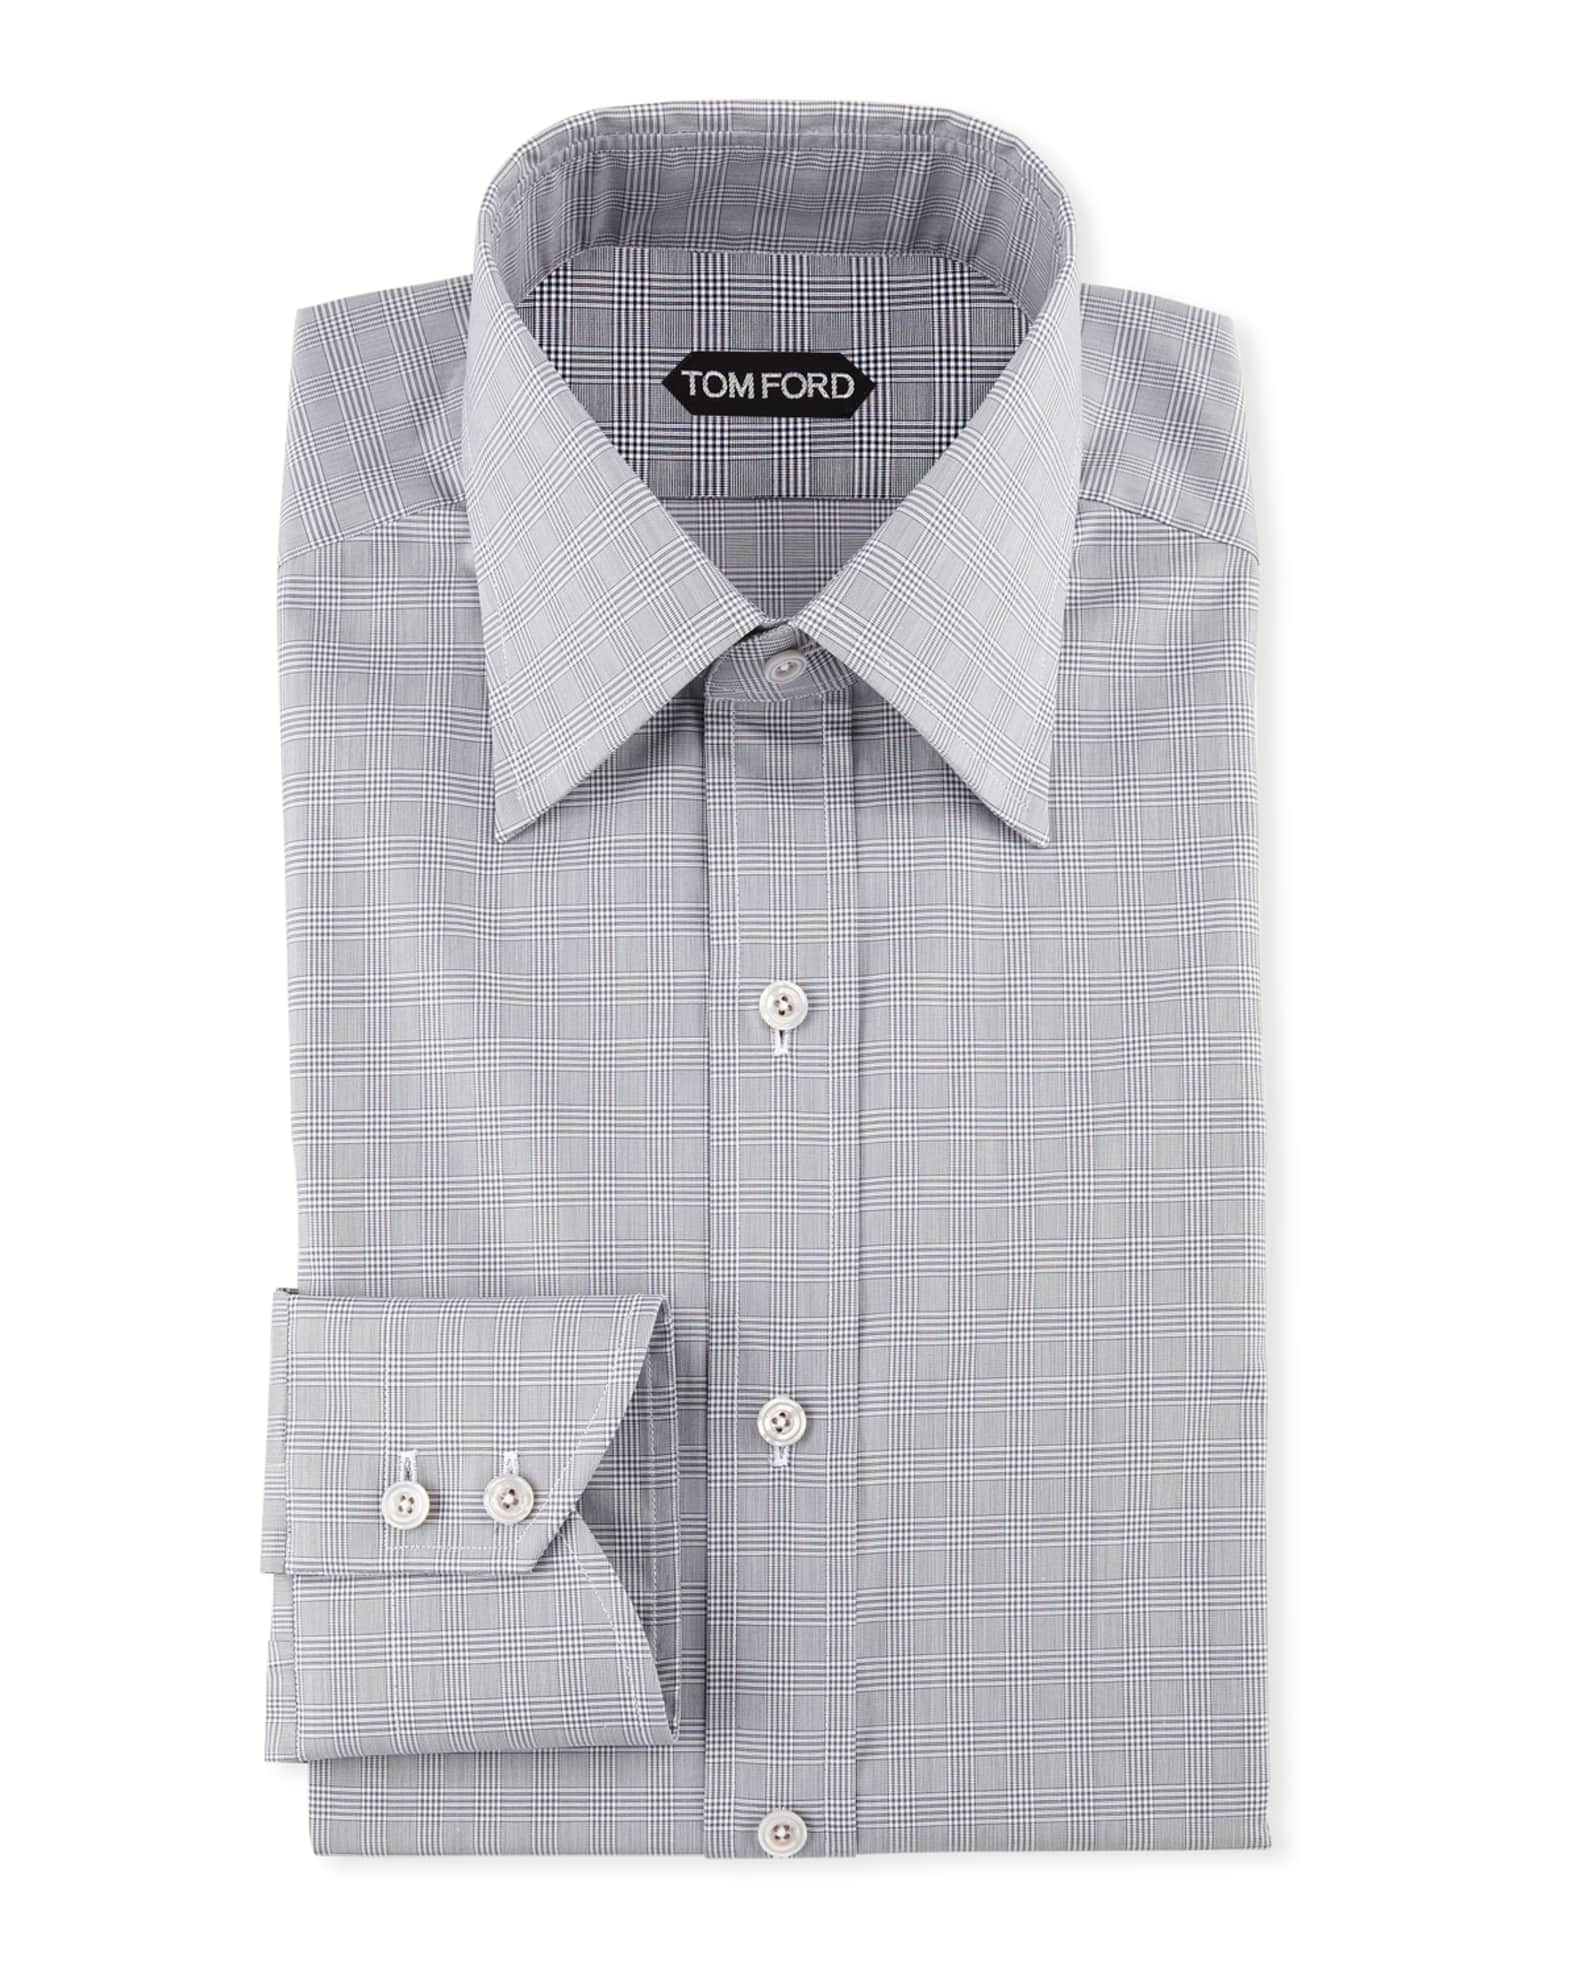 TOM FORD Men's Prince of Wales Pattern Dress Shirt | Neiman Marcus